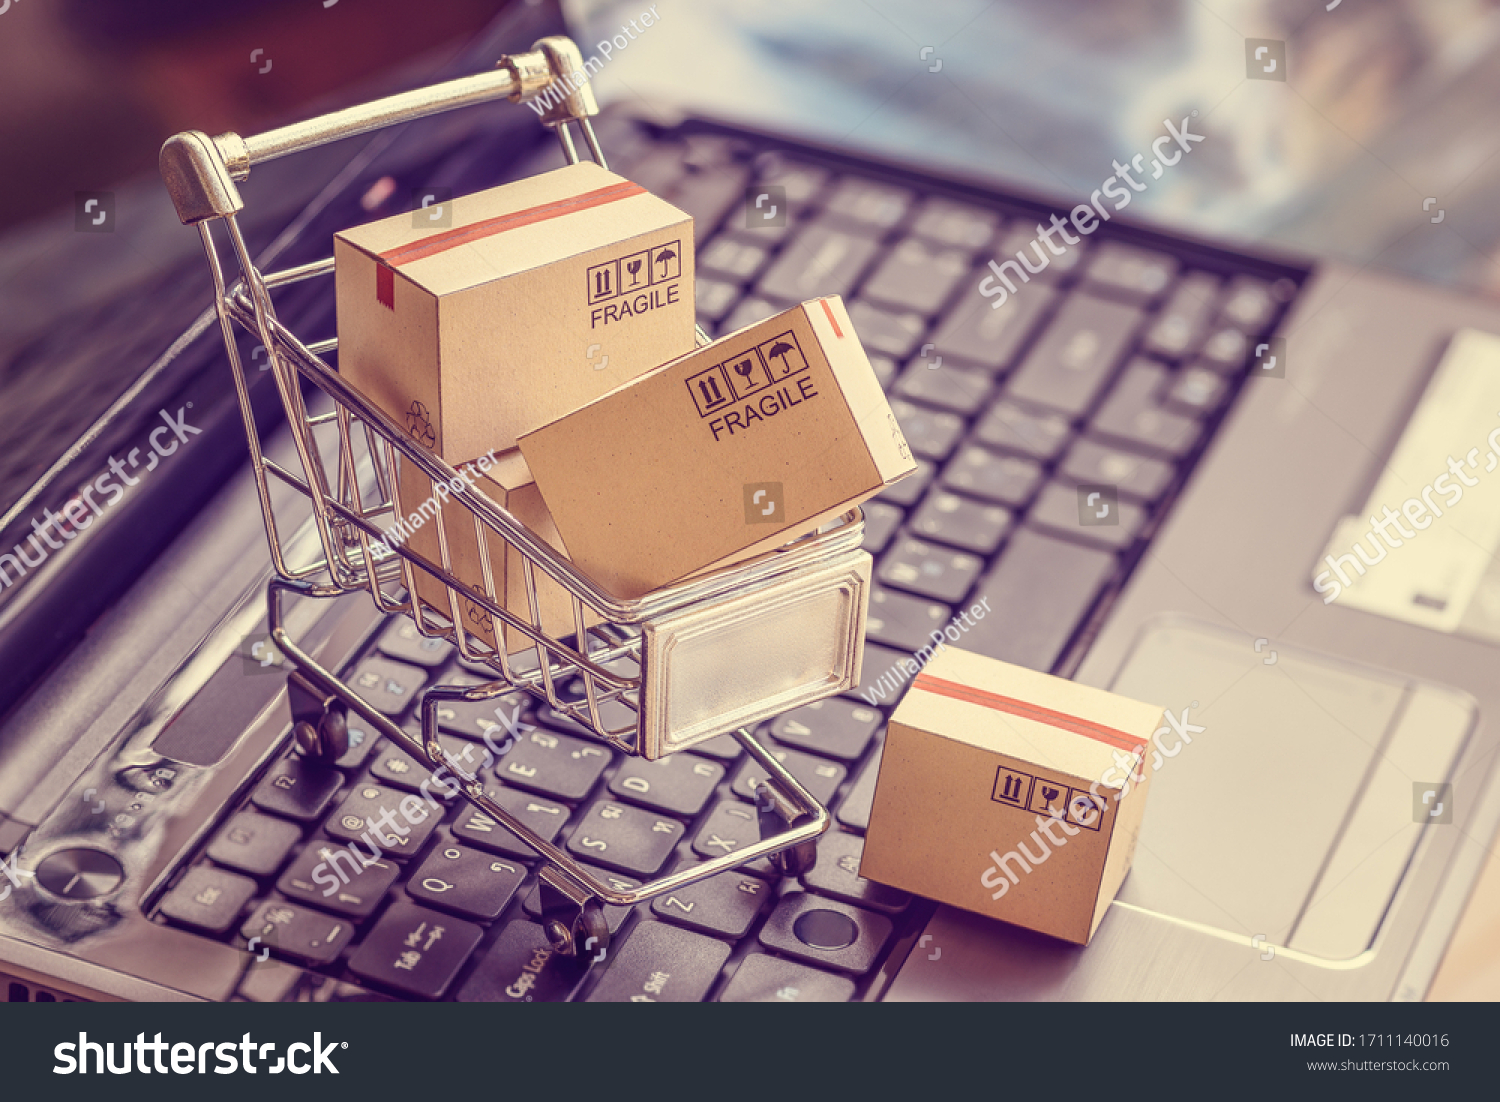 Online shopping  e-commerce and customer experience concept : Boxes with shopping cart on a laptop computer keyboard, depicts consumers  buyers buy or purchase goods and service from home or office #1711140016